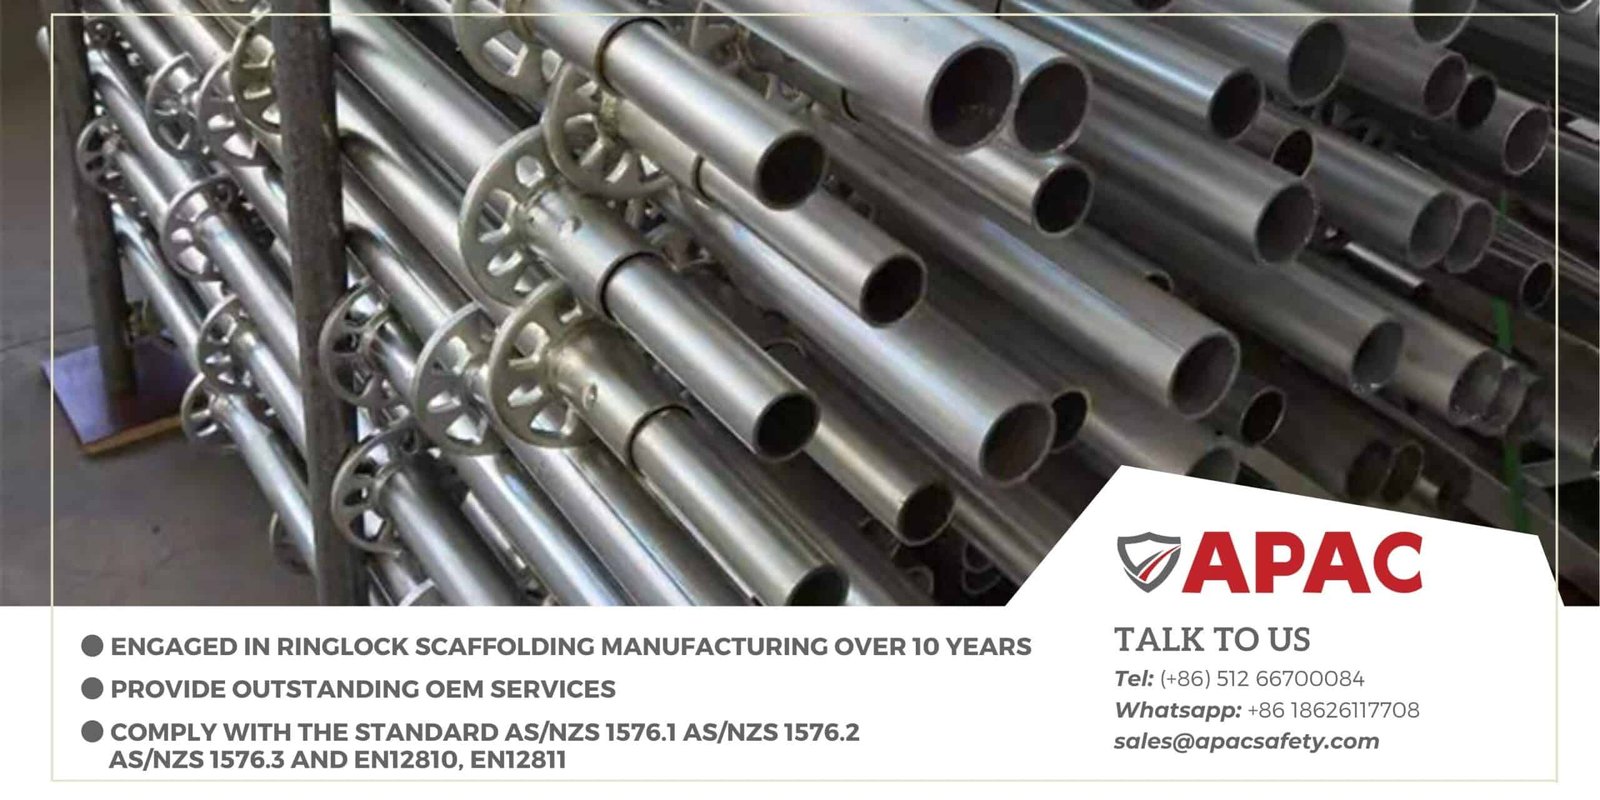 APAC-Ringlock- -Scaffolding- manufacture-10years